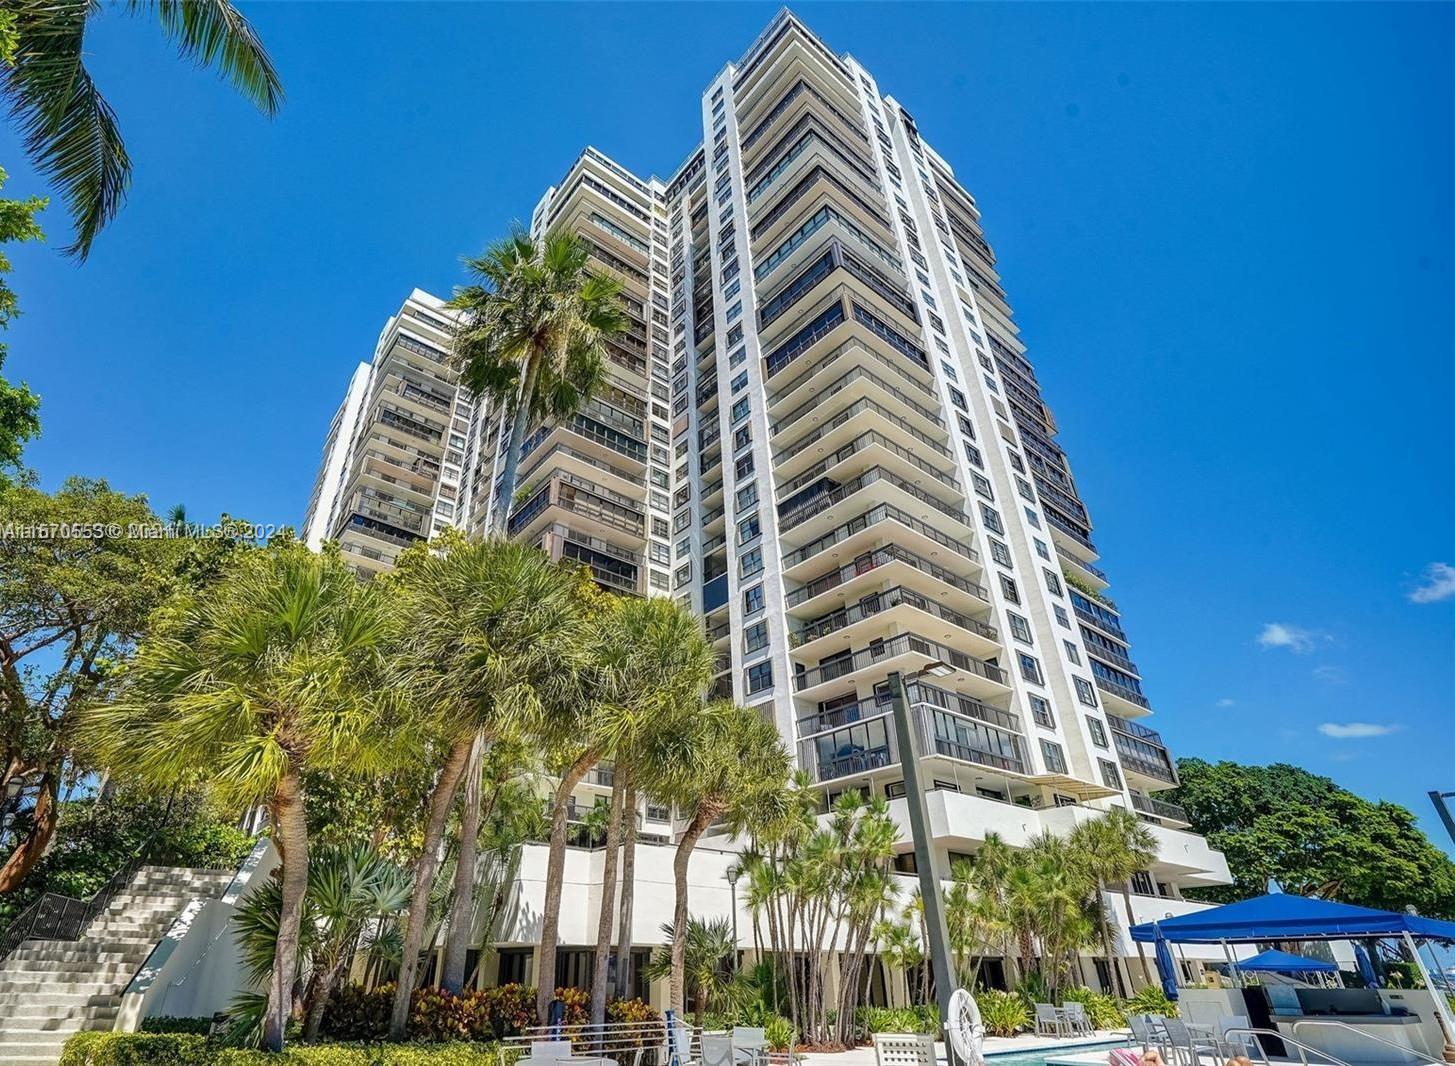 2333 Brickell Ave 1109, Miami, Florida 33129, 1 Bedroom Bedrooms, ,1 BathroomBathrooms,Residentiallease,For Rent,2333 Brickell Ave 1109,A11570553